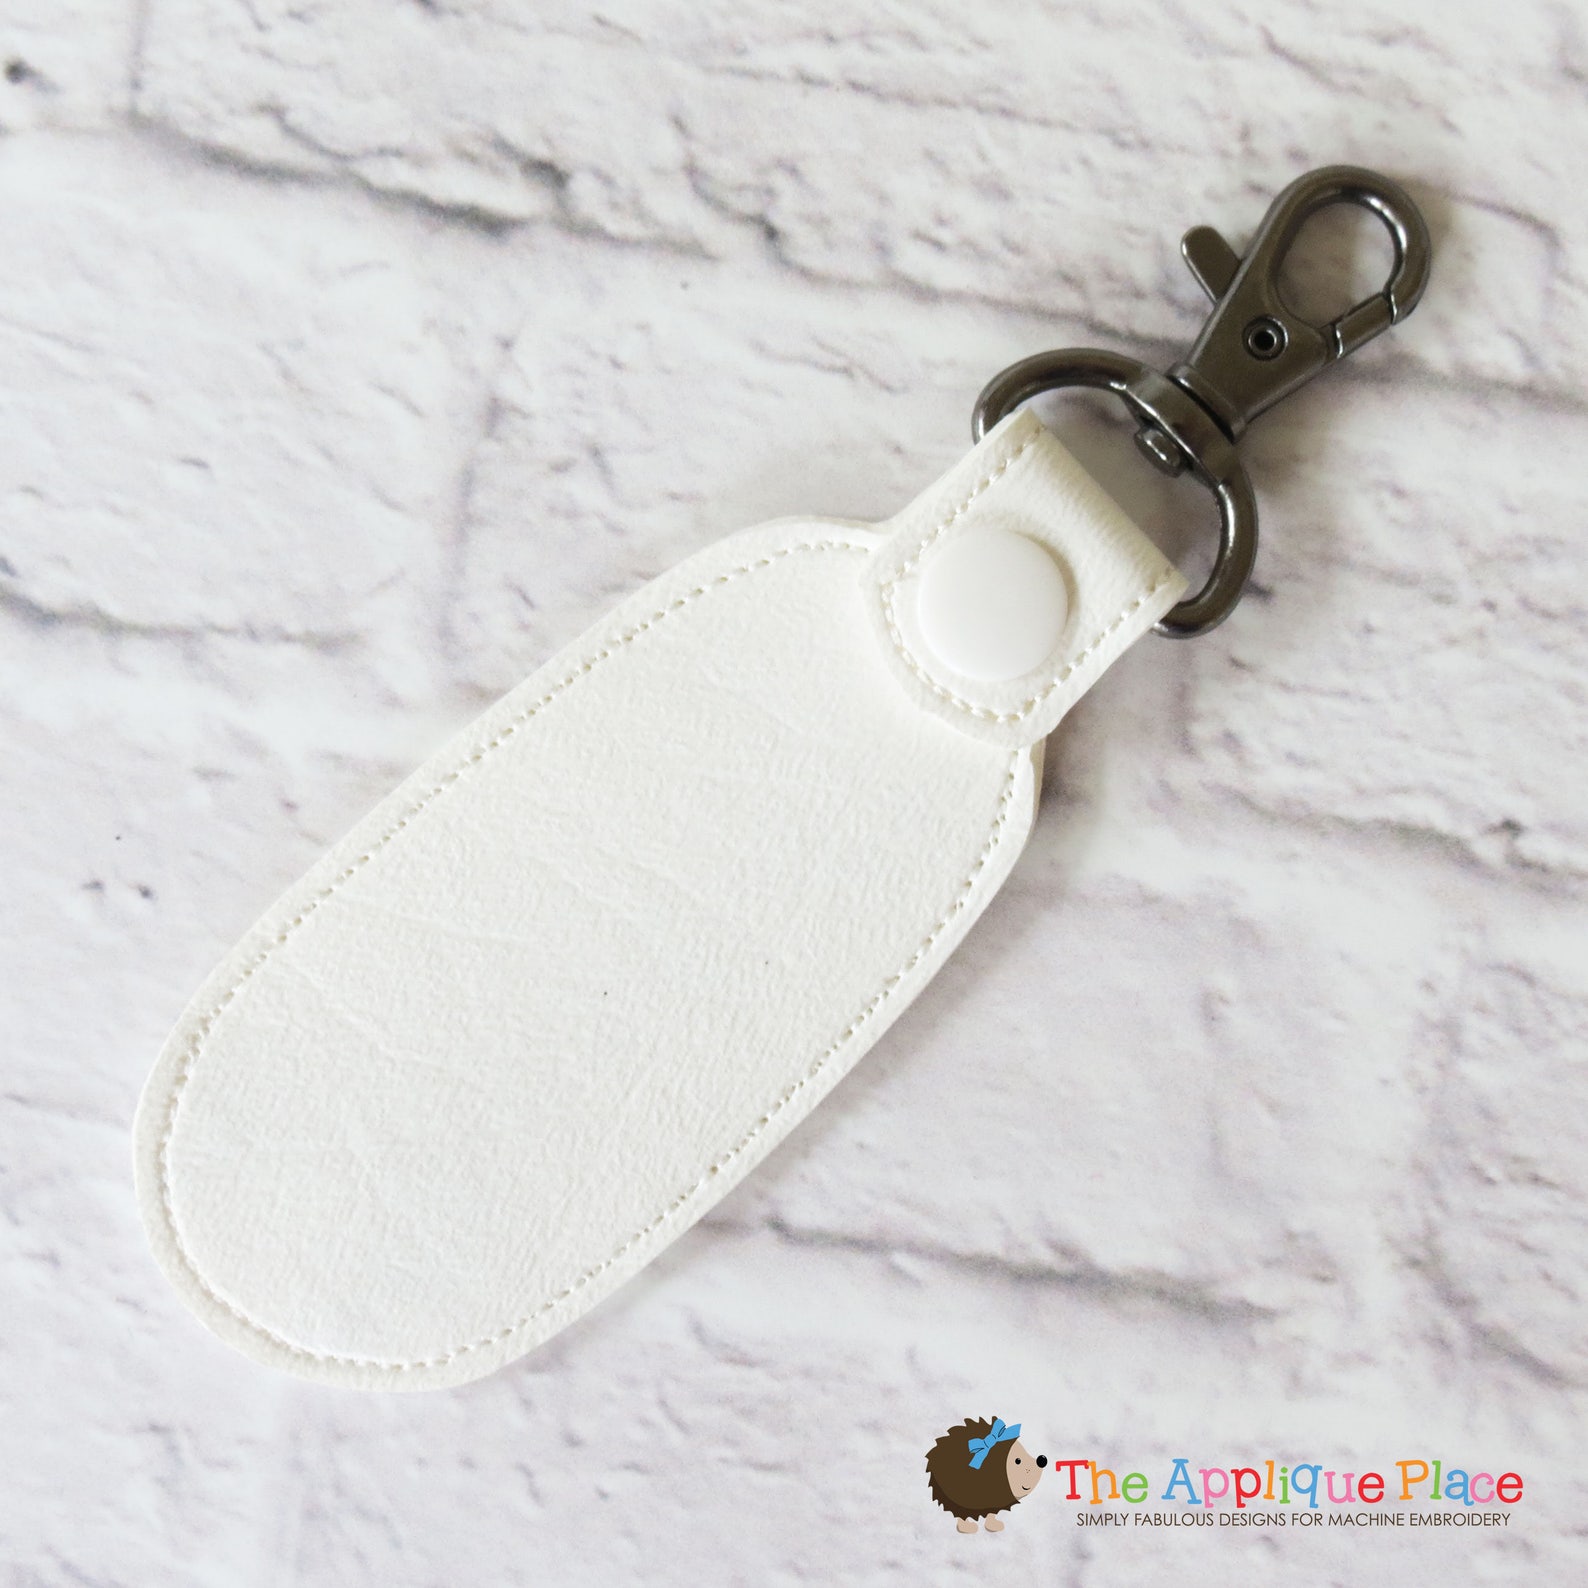 Key Fob Embroidery Design Pencil Snap Tab Embroidery | Etsy